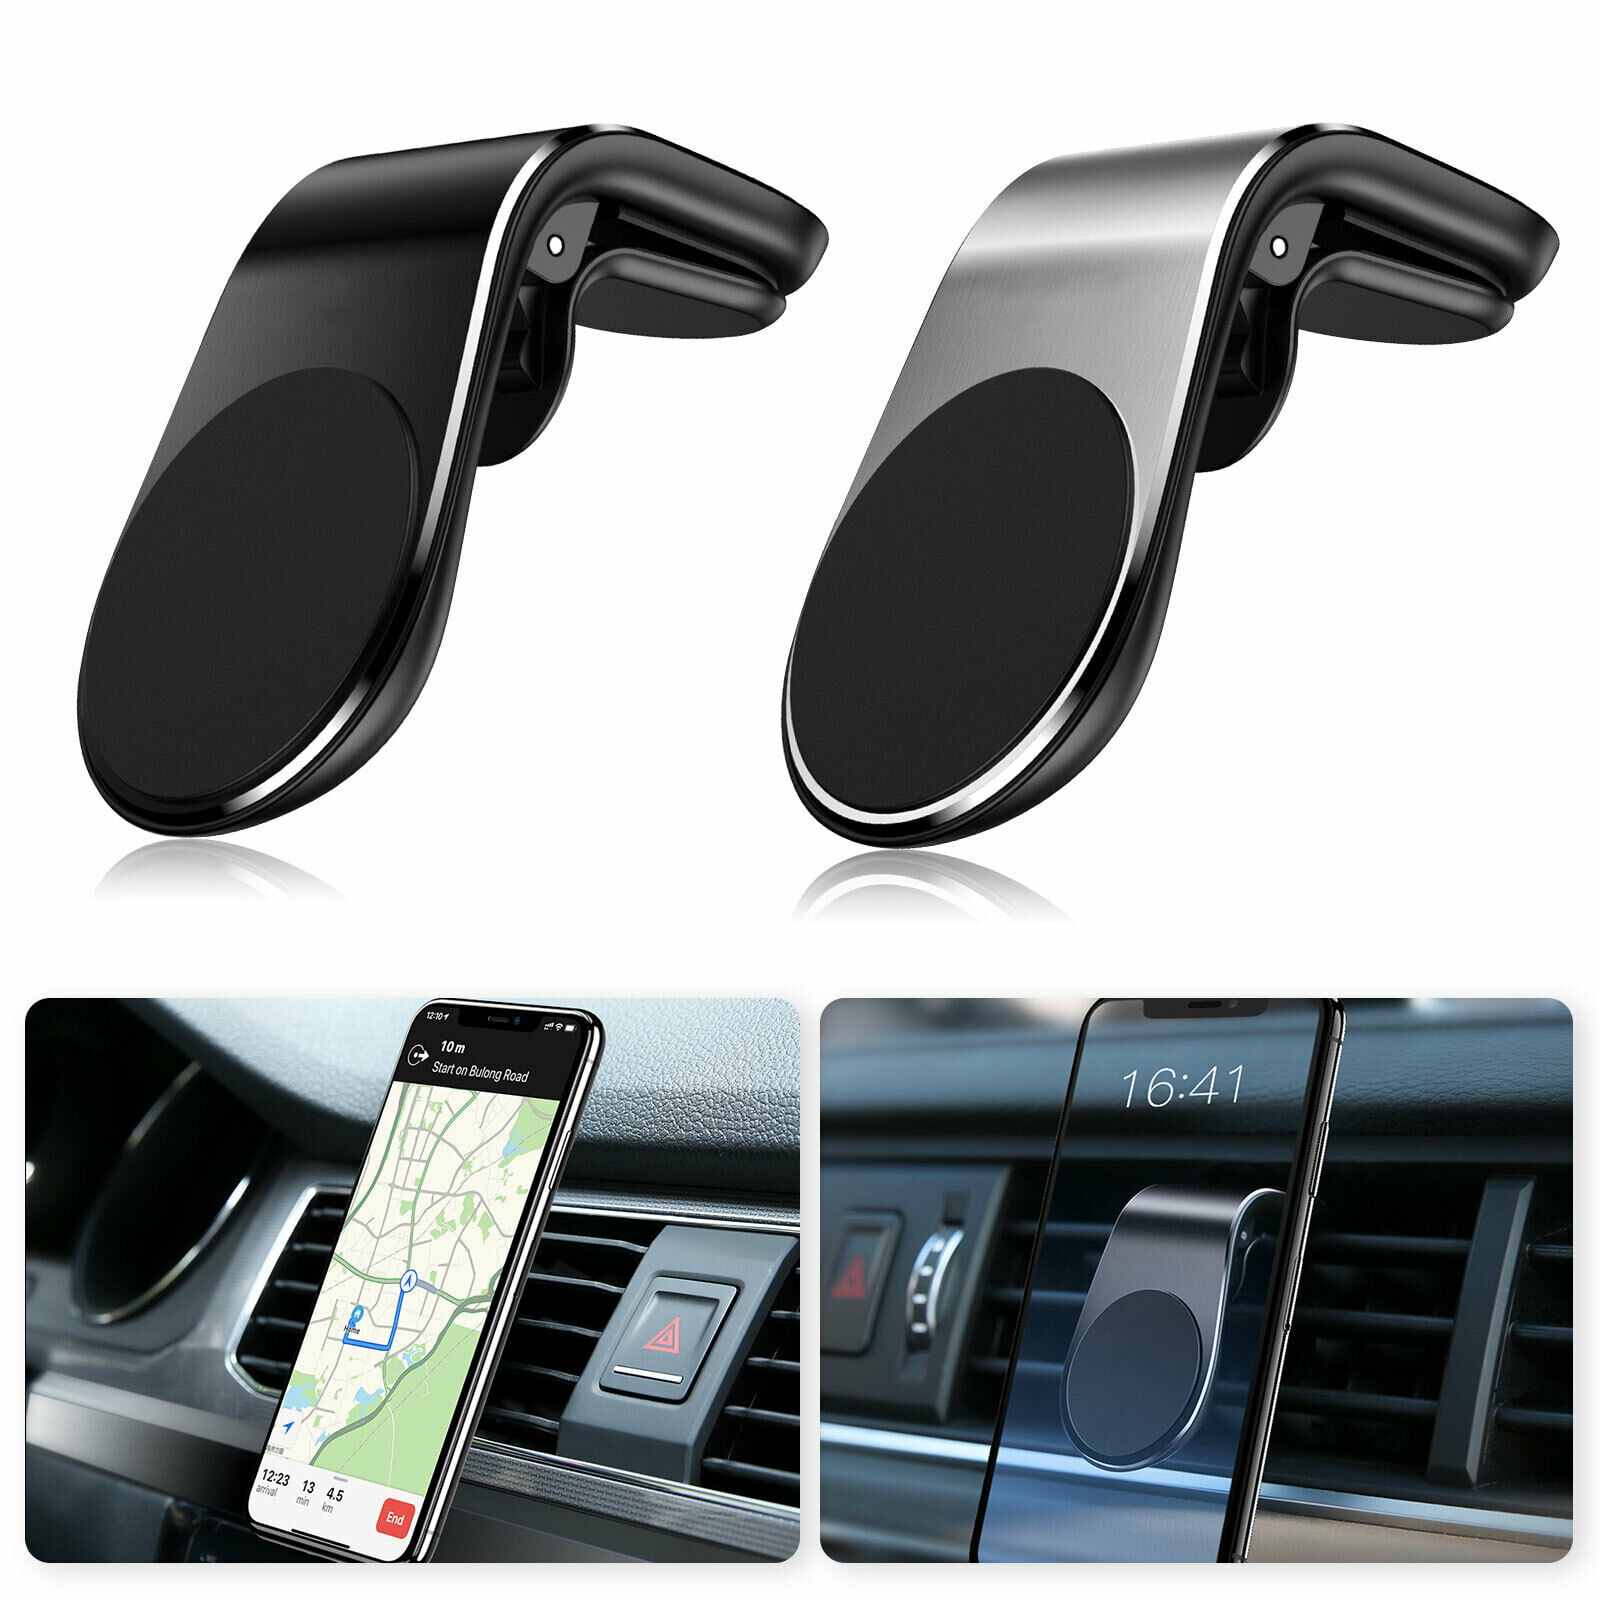 MQOUNY Cup Holder Phone Mount,Long Arm Cell Phone Cup Car Phone Holder & Air Vent Car Phone Mount Compatible for iPhone XR/XS/XS Max/X/8/8 Plus Samsung S10/S10e/S9+/8/8 and More Gray 